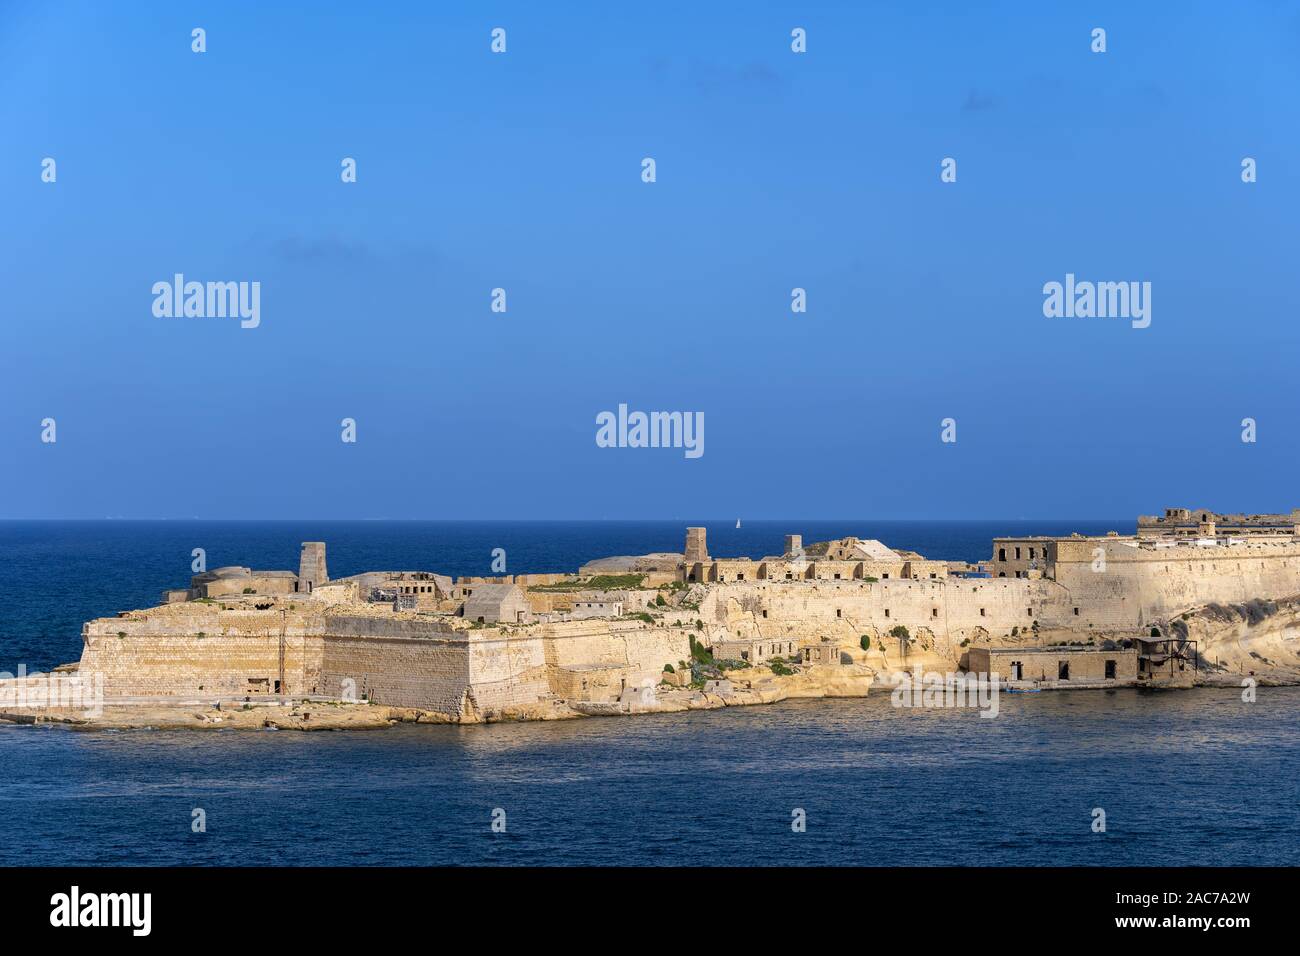 Fort Ricasoli in Kalkara, Malta, fortification built by the Order of Saint John in 17th century, guarding the entrance to Grand Harbour in the Mediter Stock Photo